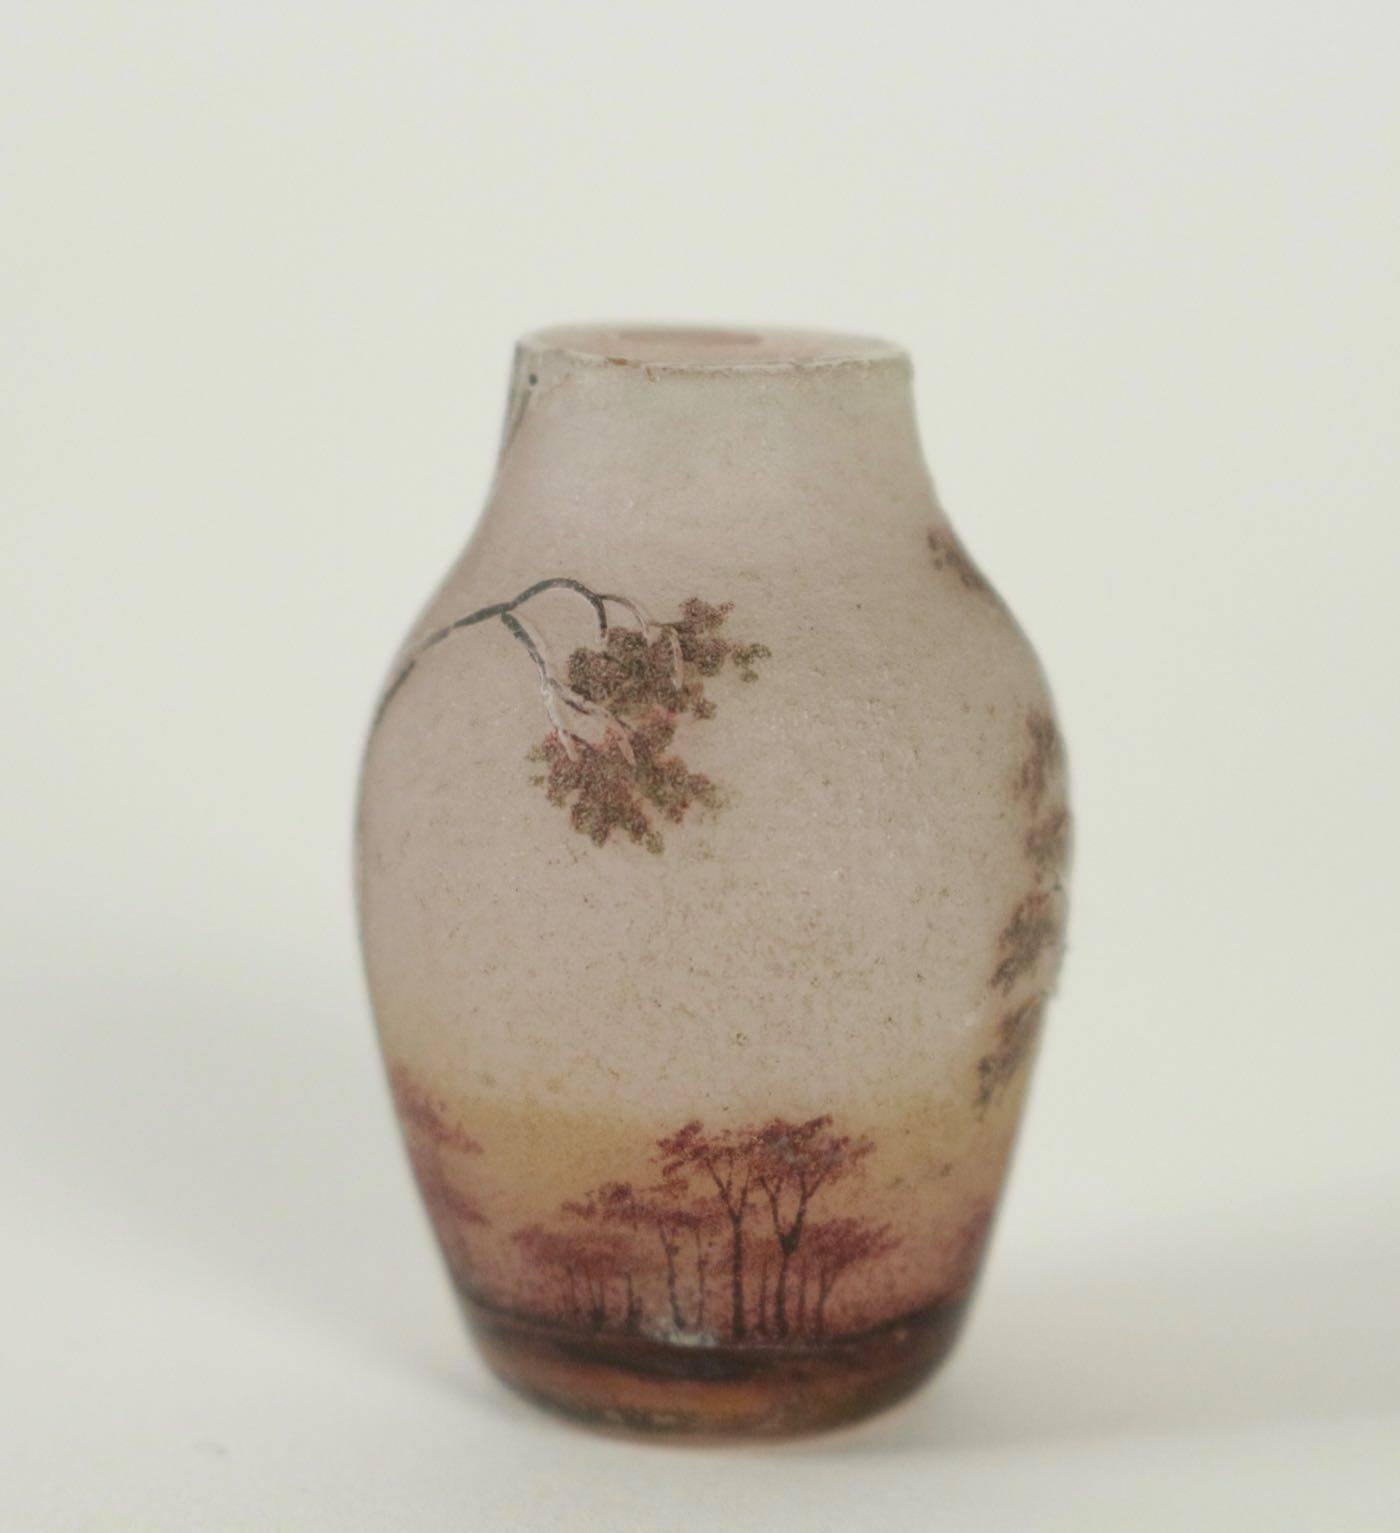 Daum acid etched and enameled miniature with the 'birch trees in autumn' design:
acid etched and enameled Daum landscape miniature vase with autumn Birch trees against a pink sky are both created with an inner layer of opaline pink glass with a